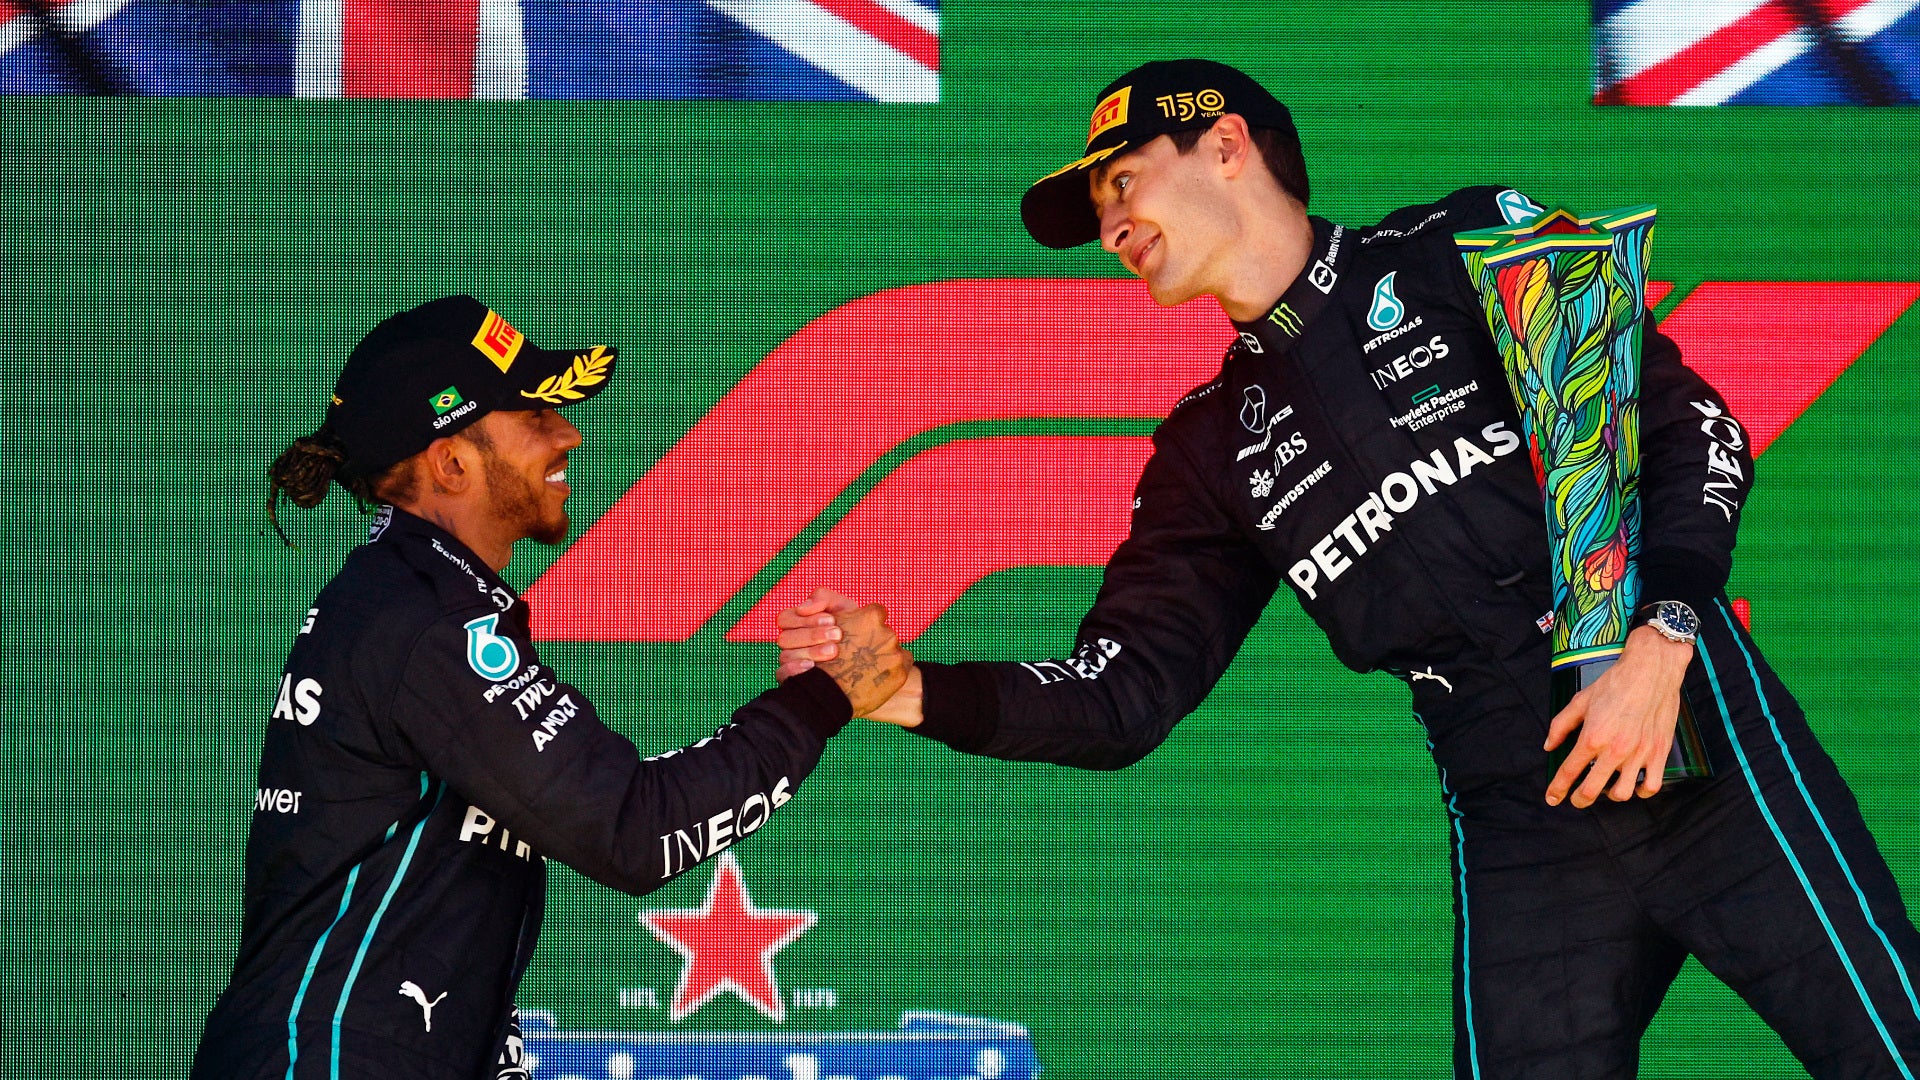 Fans Disagree on Whether Hamilton Earned British Driver of the Year Award